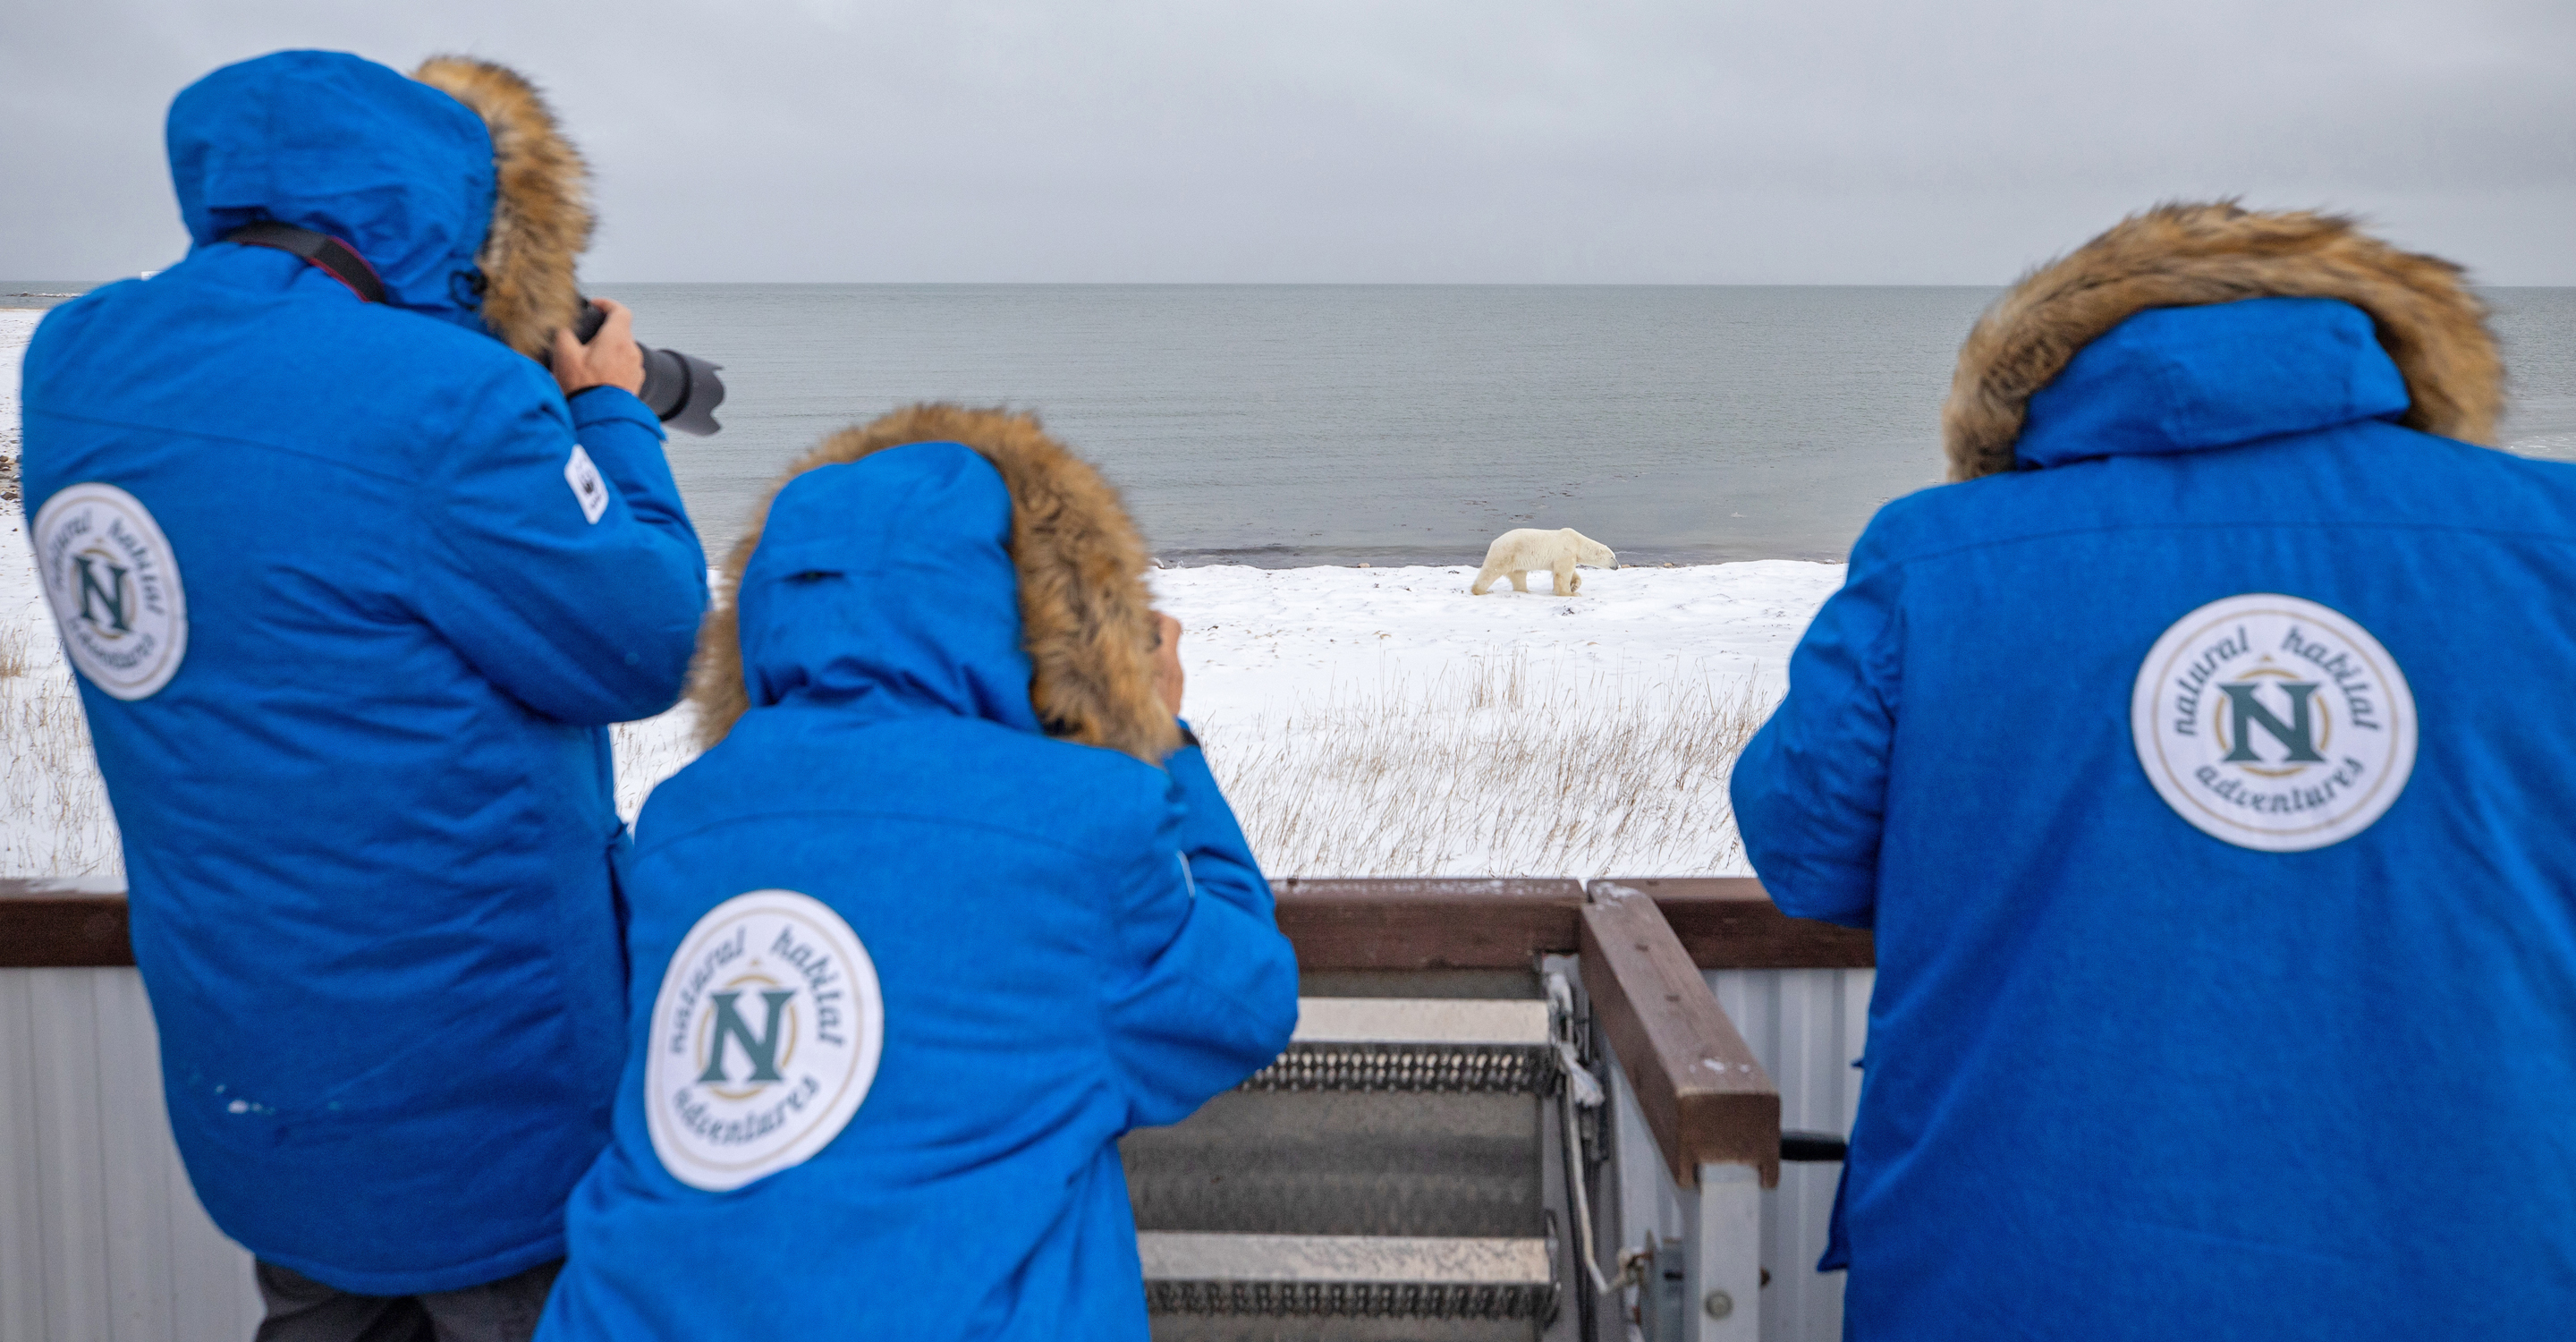 Three Natural Habitat Adventures travelers stand on the deck of a Polar Rover and photograph a polar bear on the edge of the Hudson Bay, Churchill, Manitoba, Canada